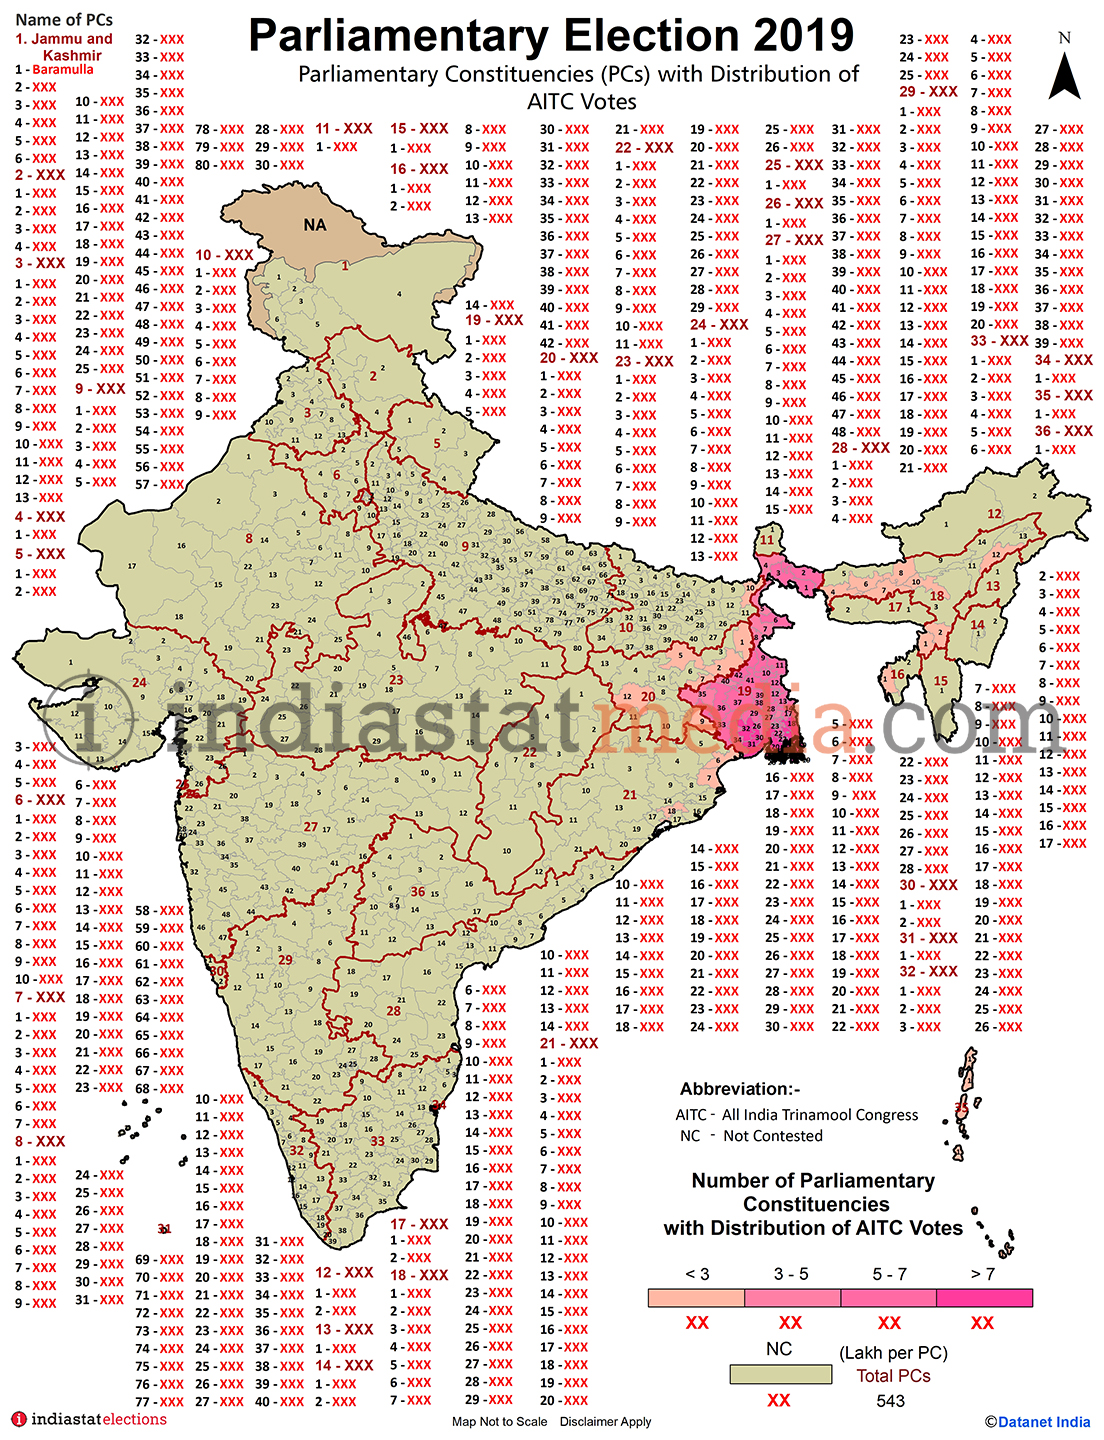 Distribution of AITC Votes by Parliamentary Constituencies in India (Parliamentary Election - 2019)